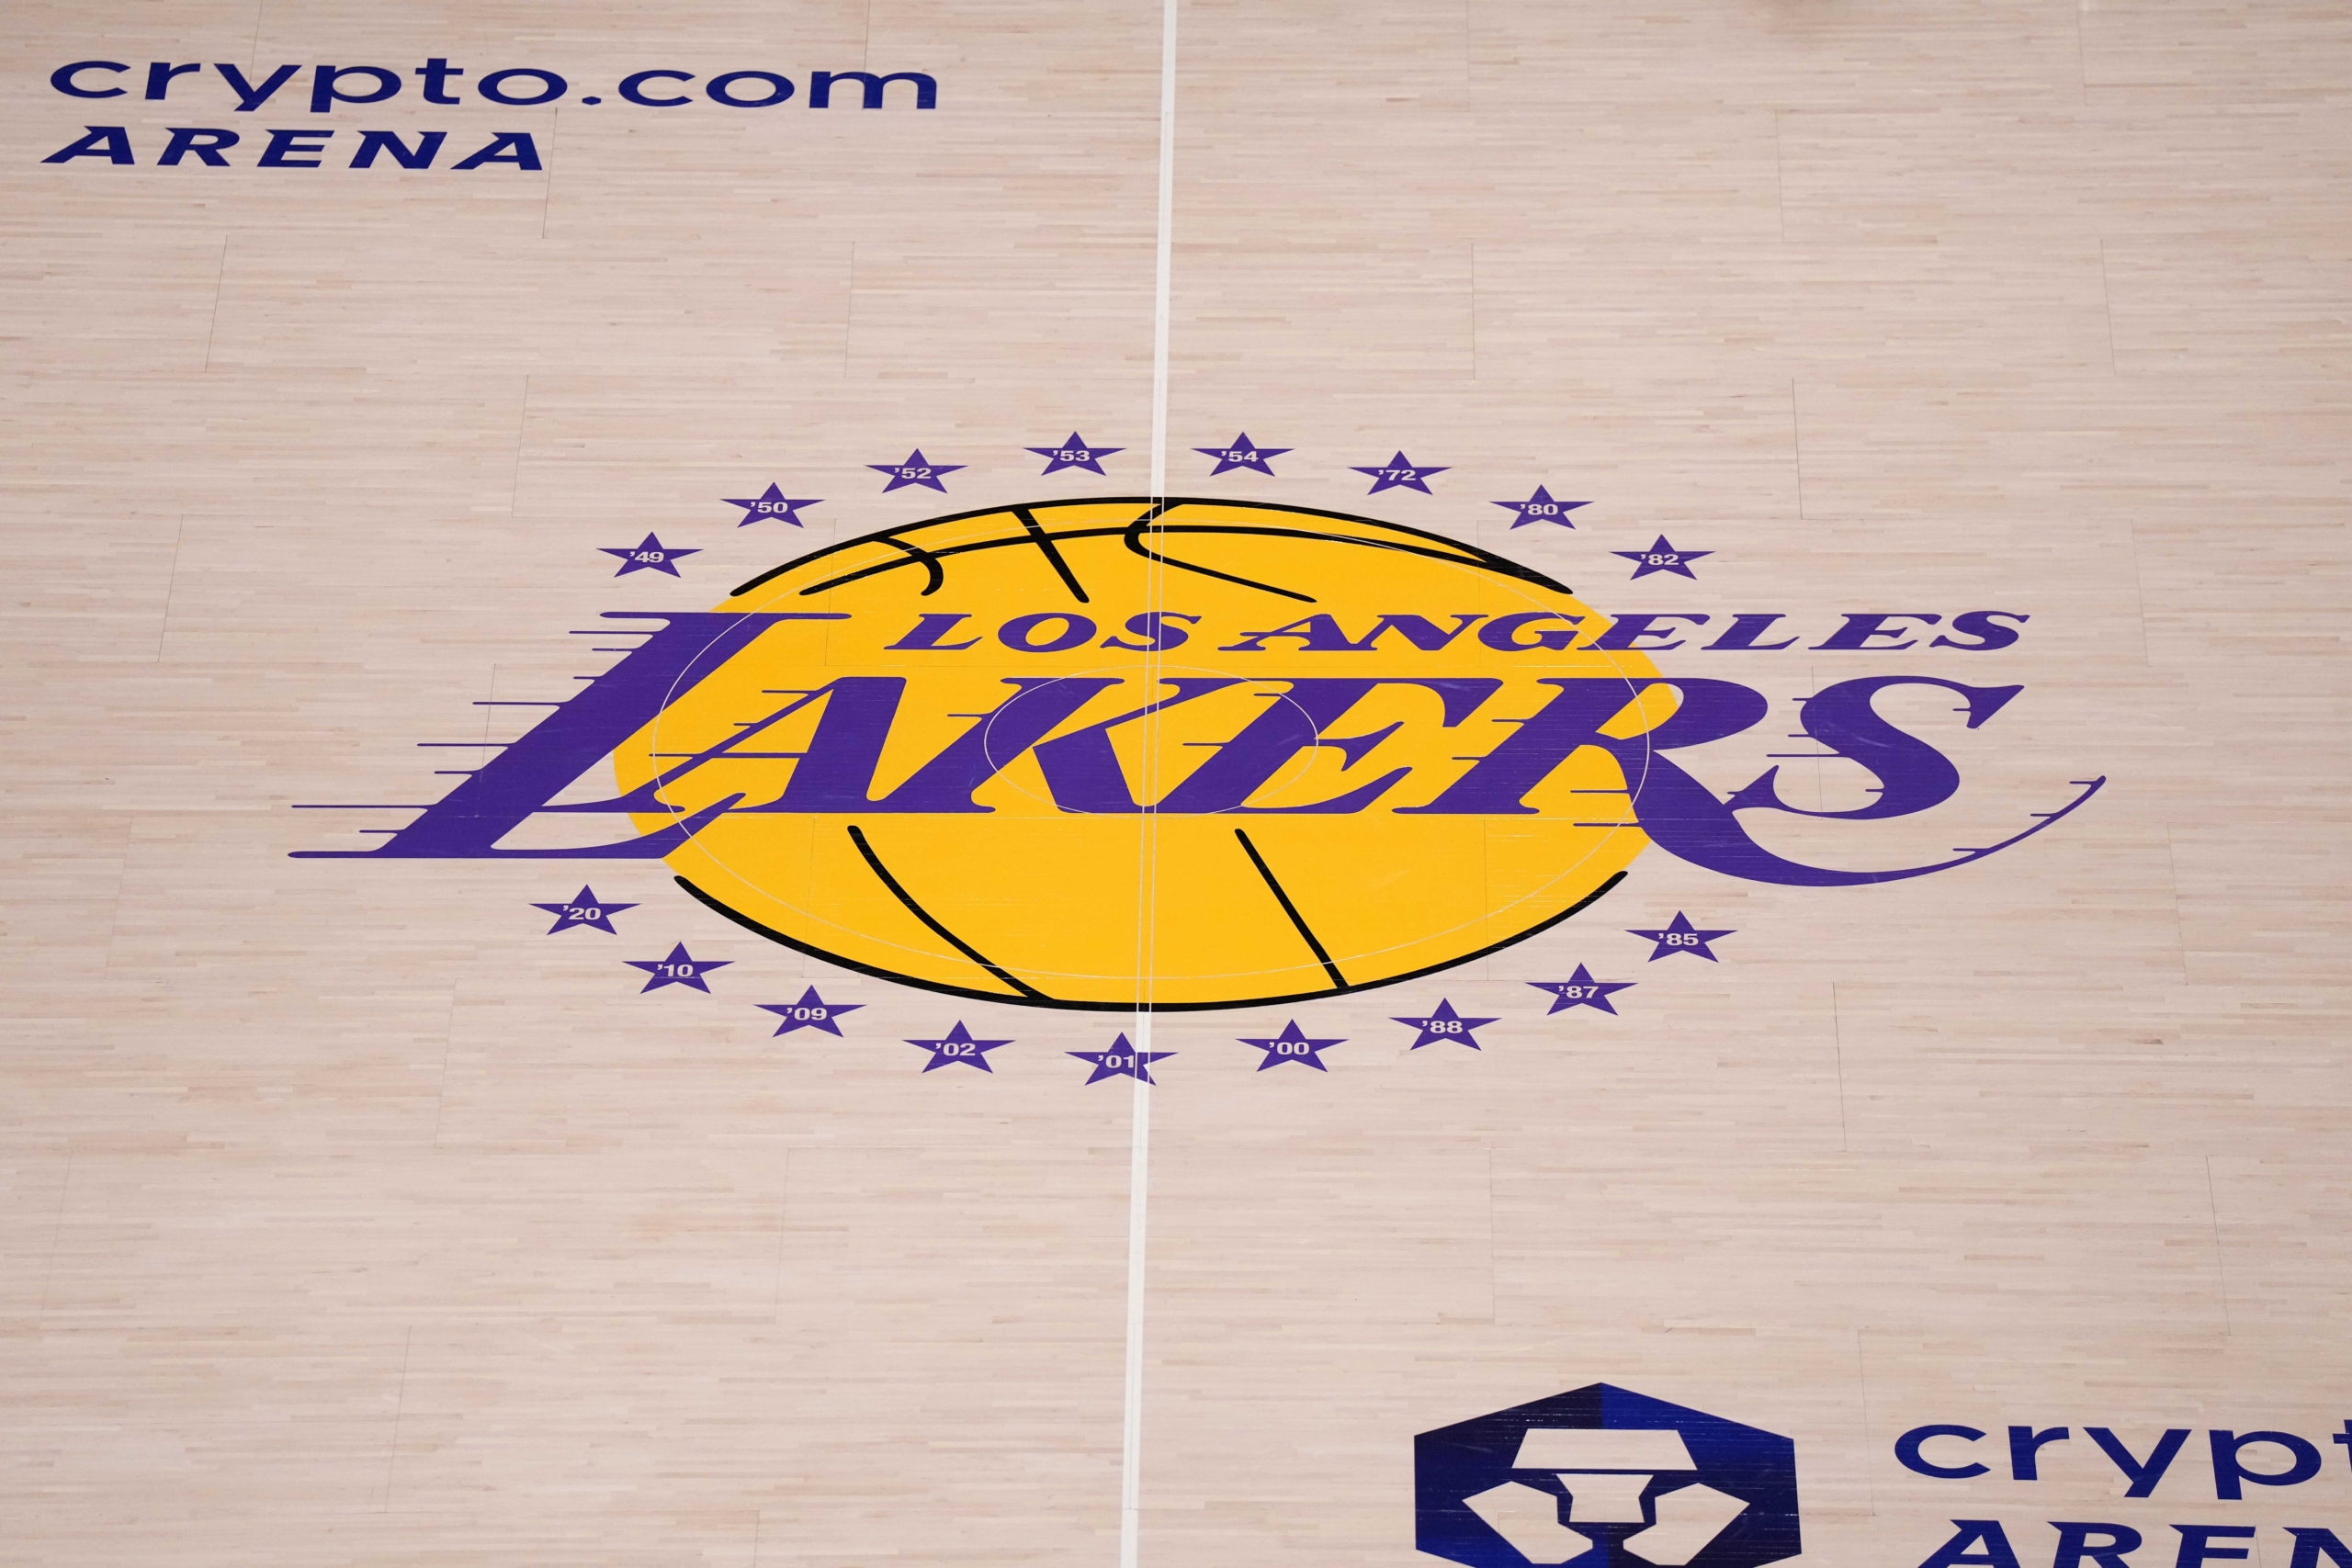 Lakers Sign Center In Free Agency 